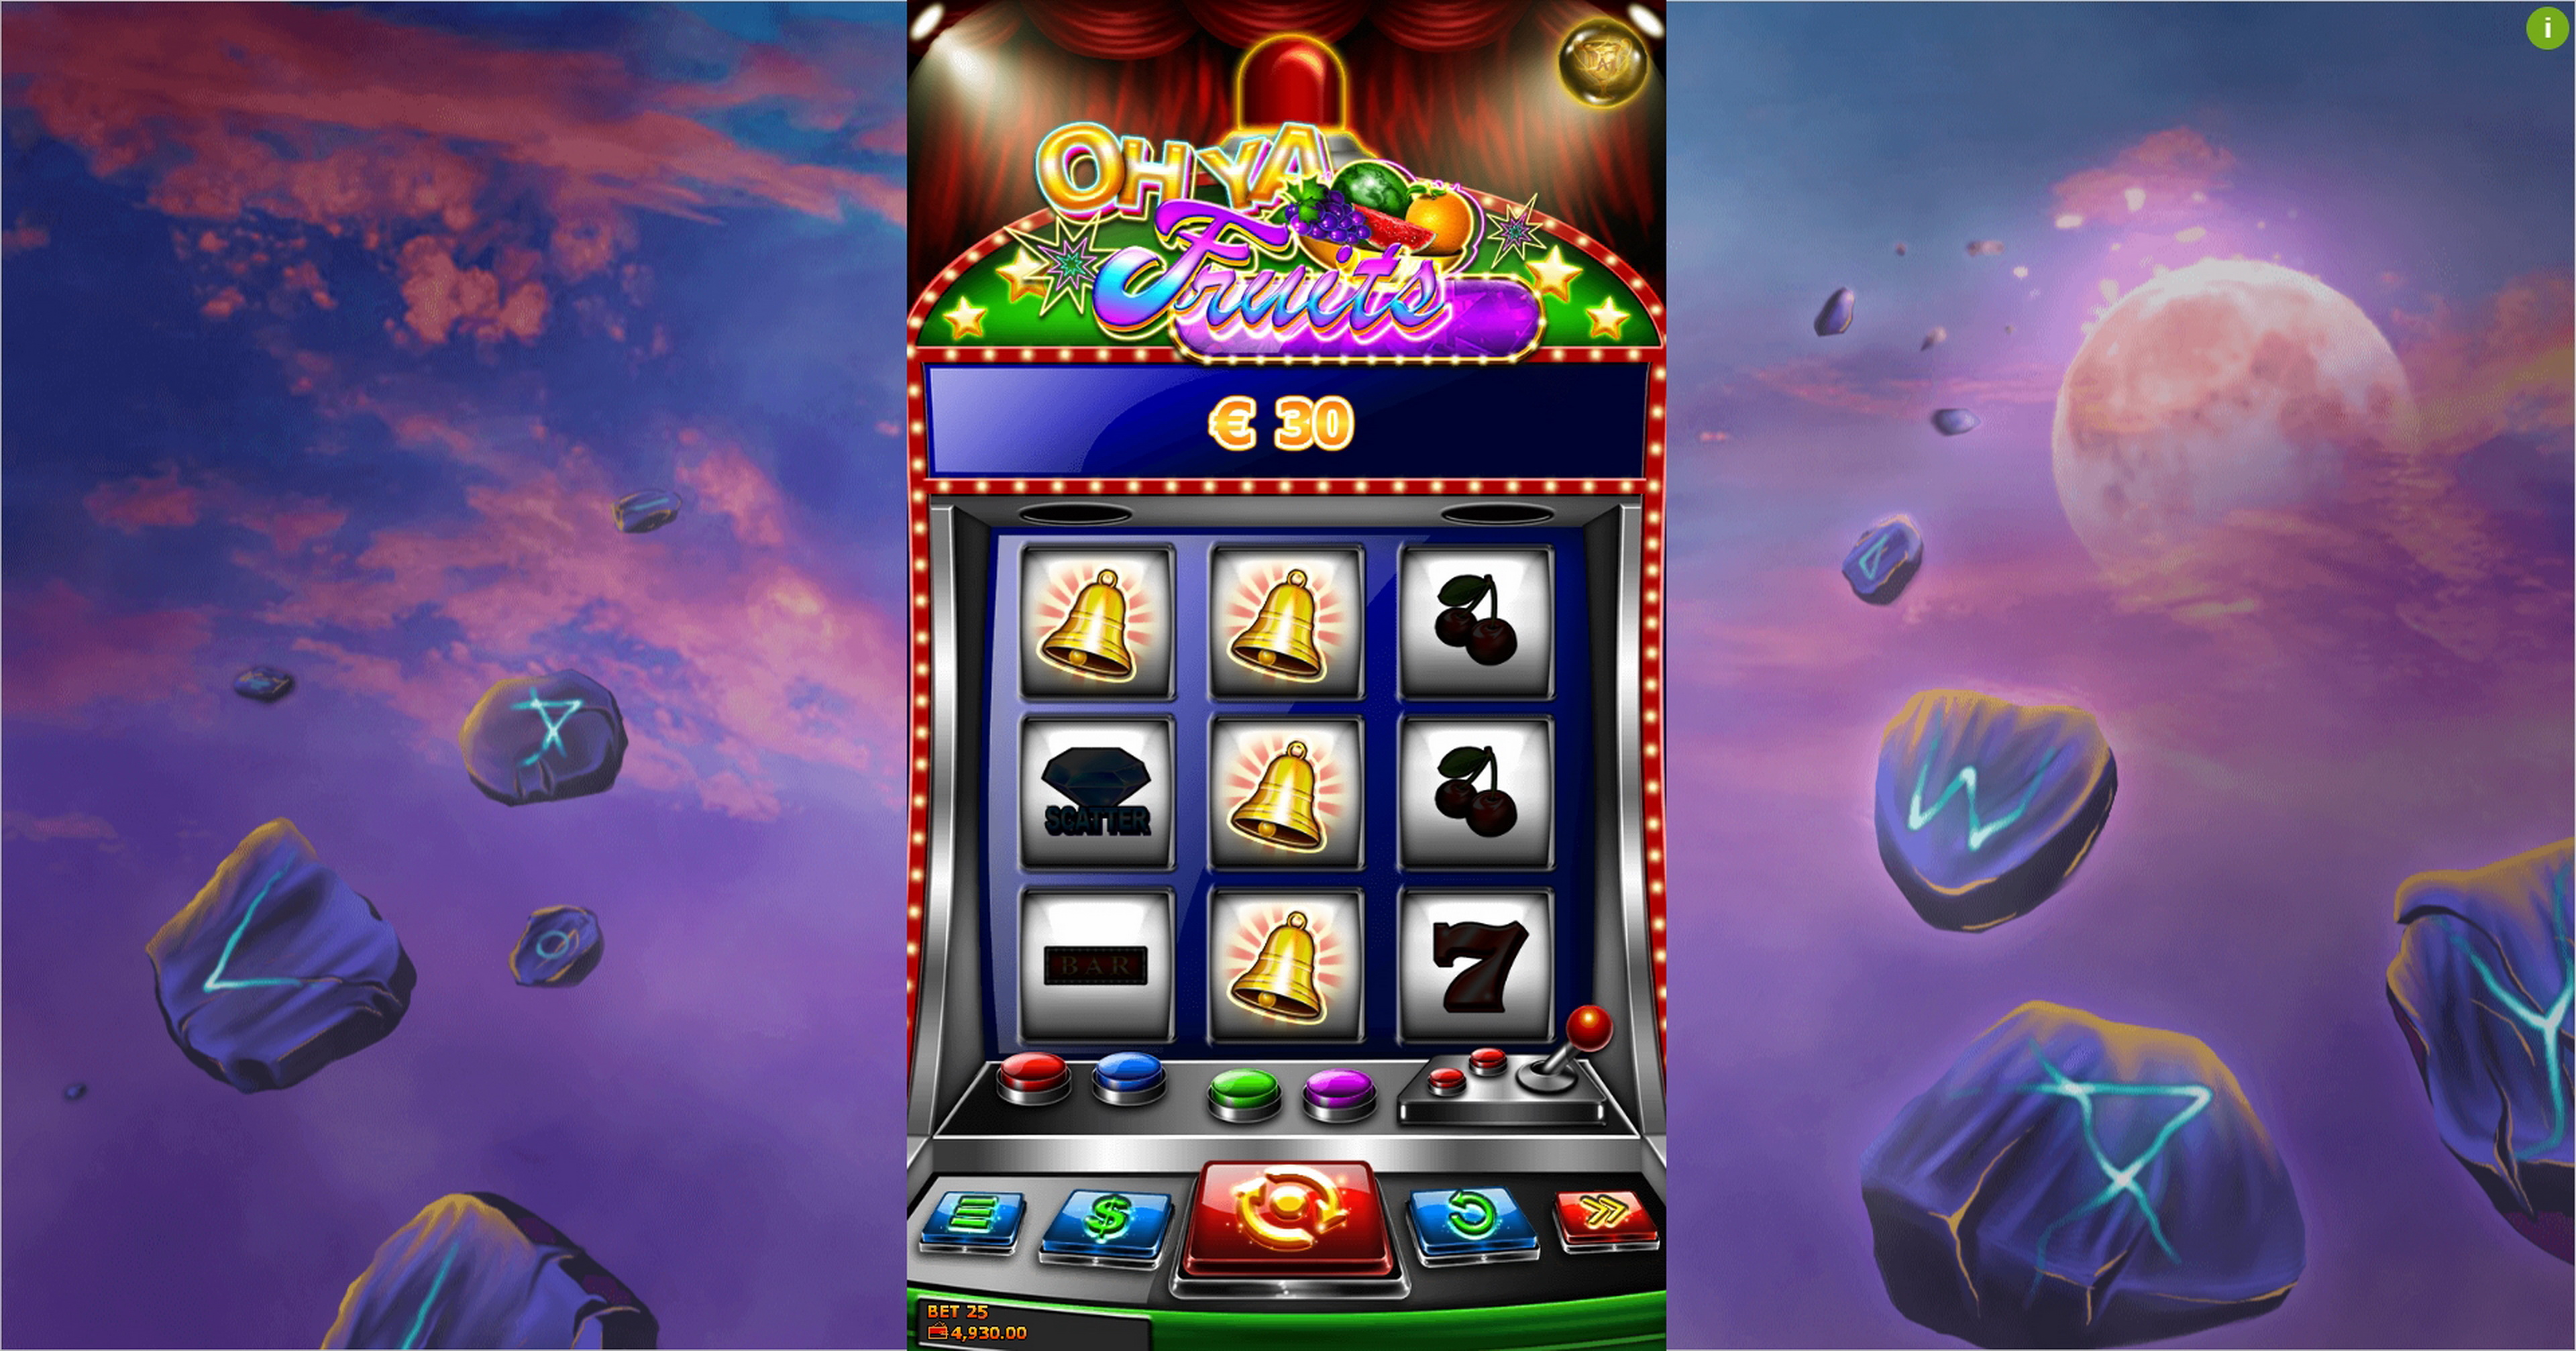 Win Money in Ohya Fruits Free Slot Game by AllWaySpin